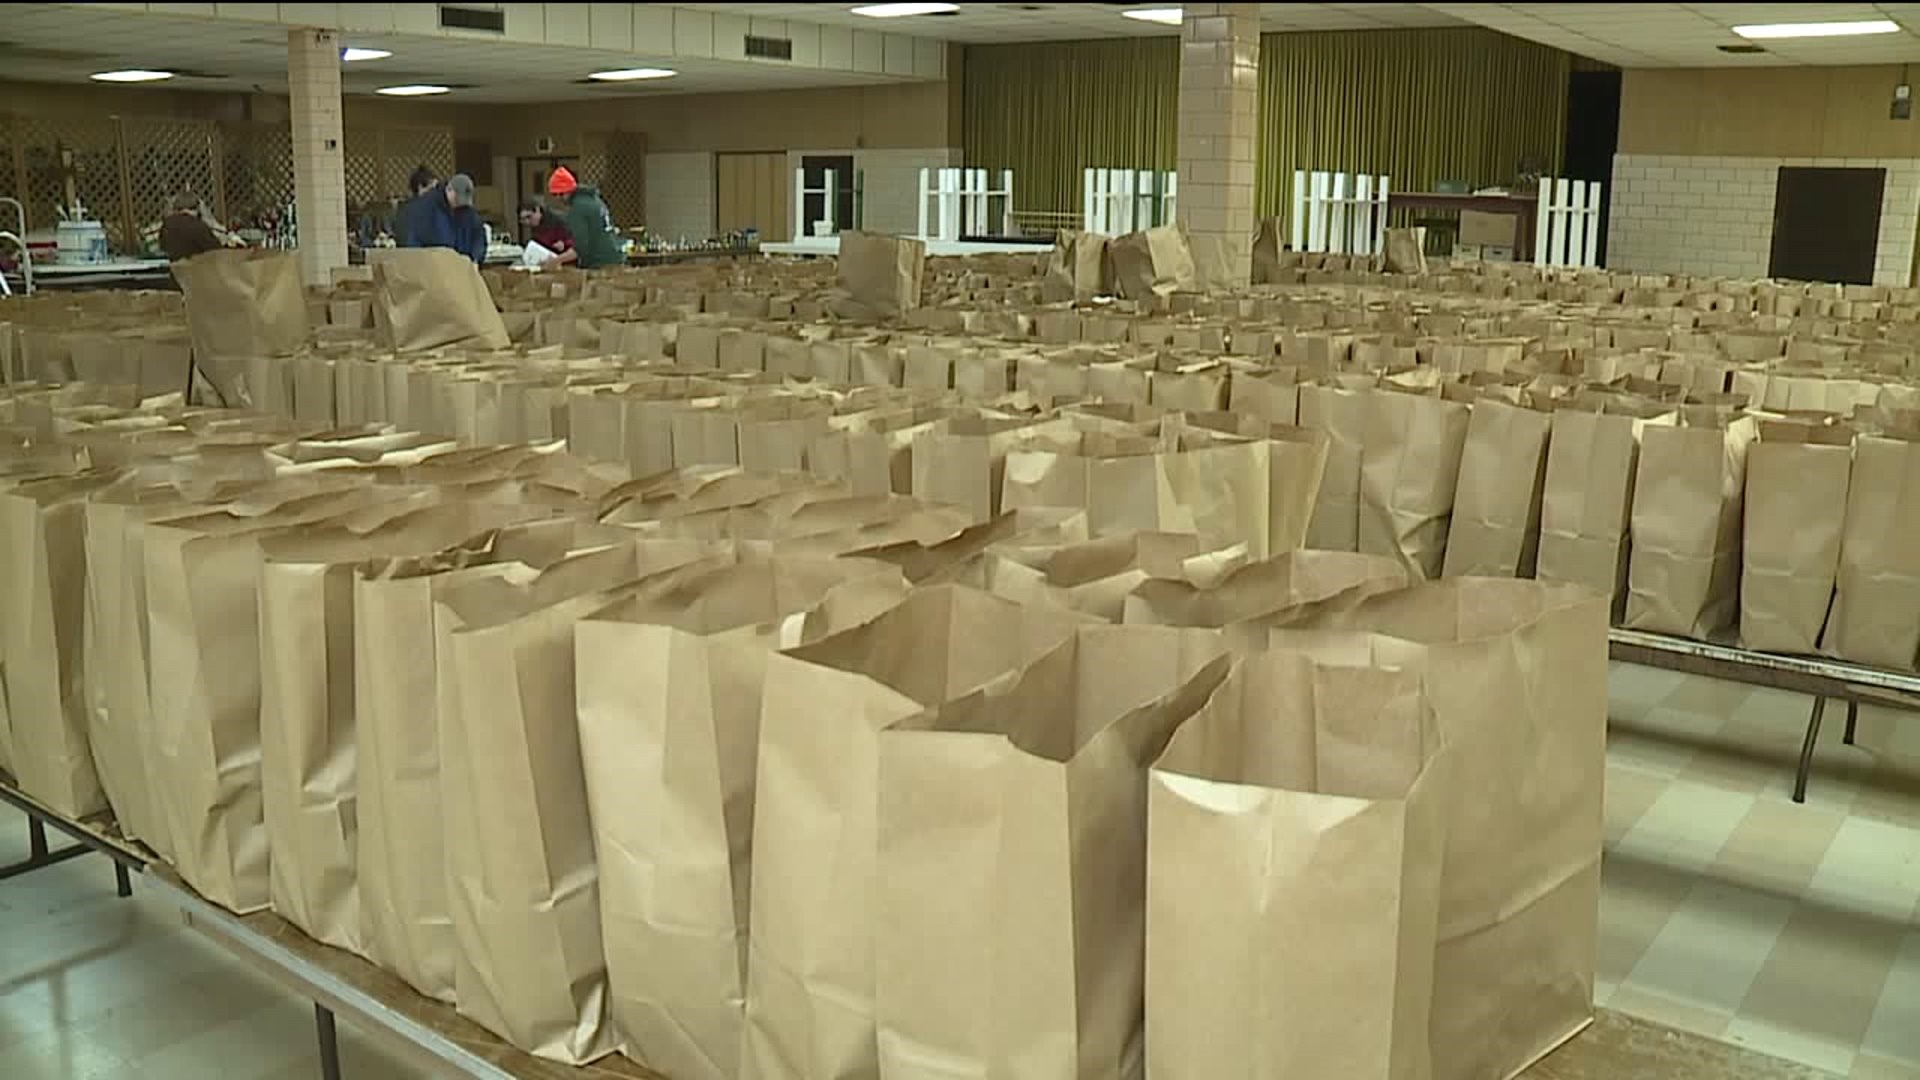 More Than 950 Families Receive Holiday Food Items